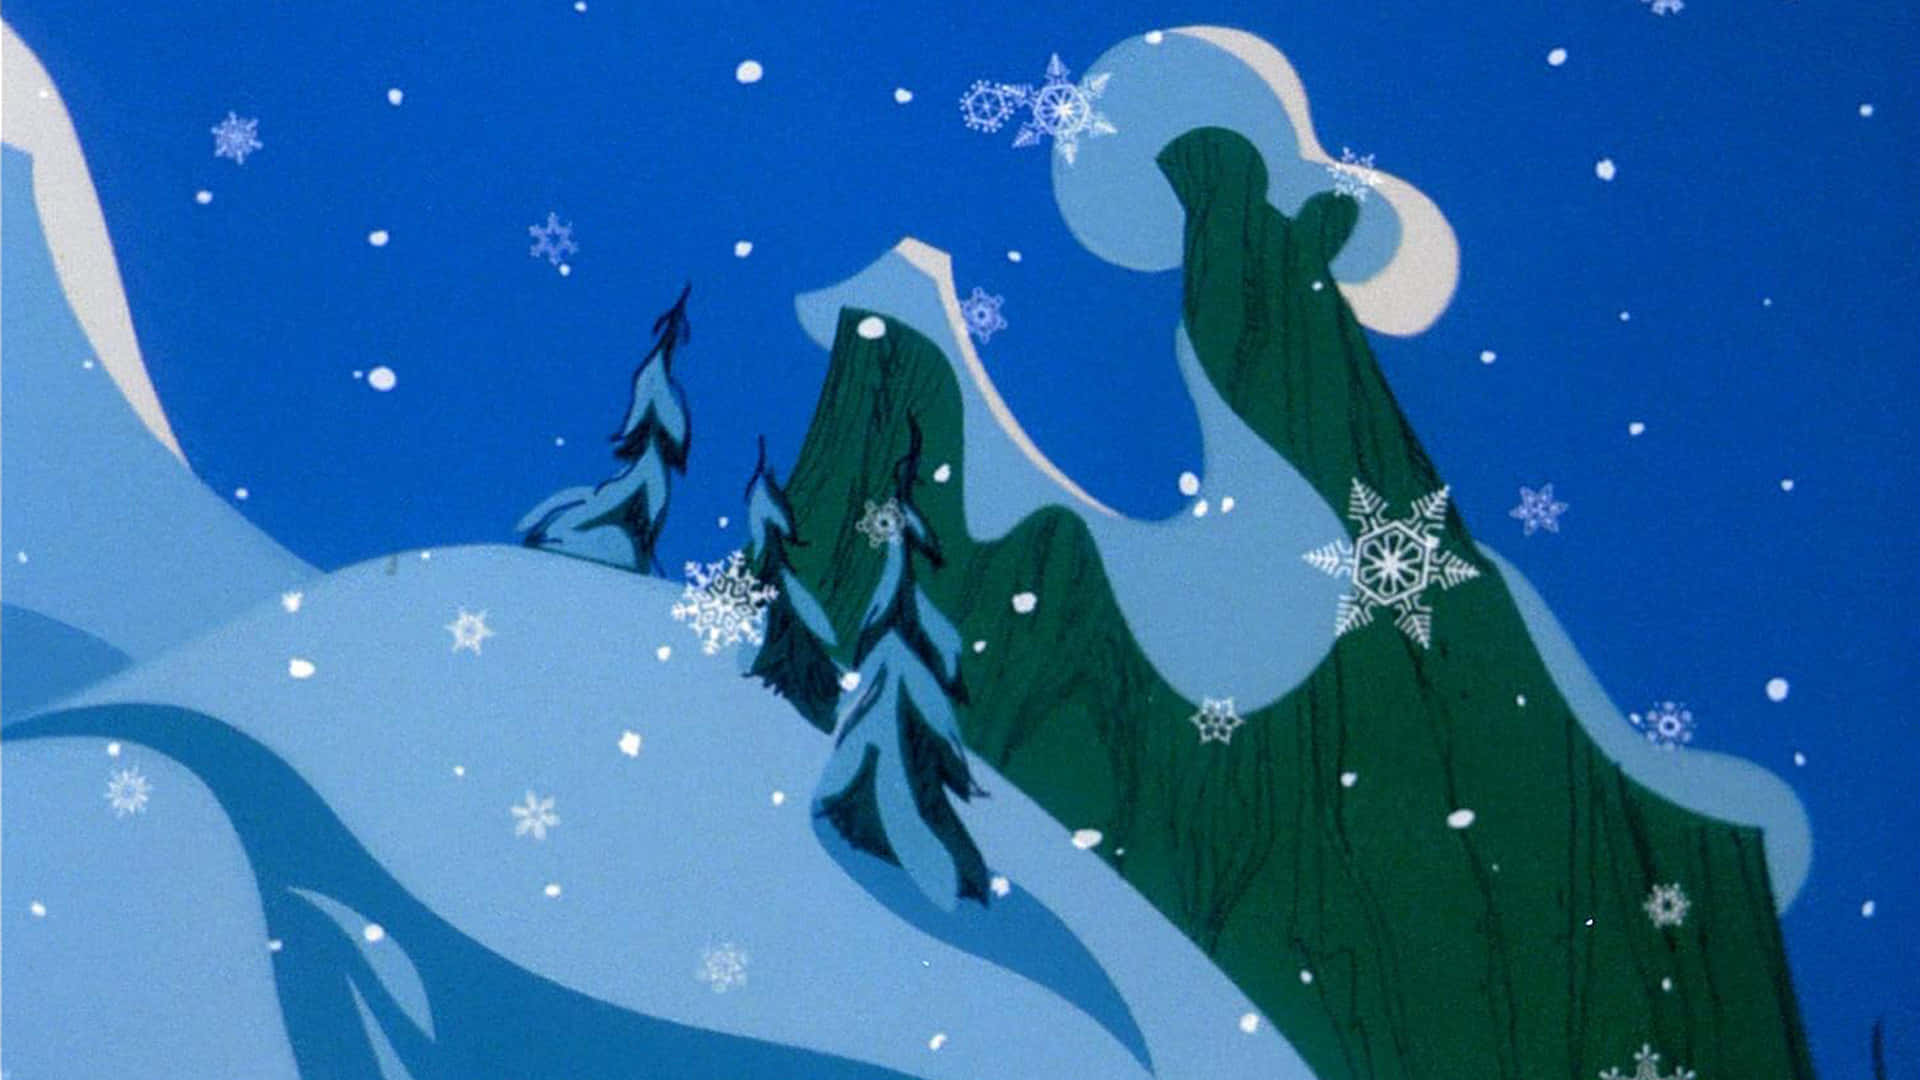 A Cartoon Scene With Snow And Snowflakes Wallpaper